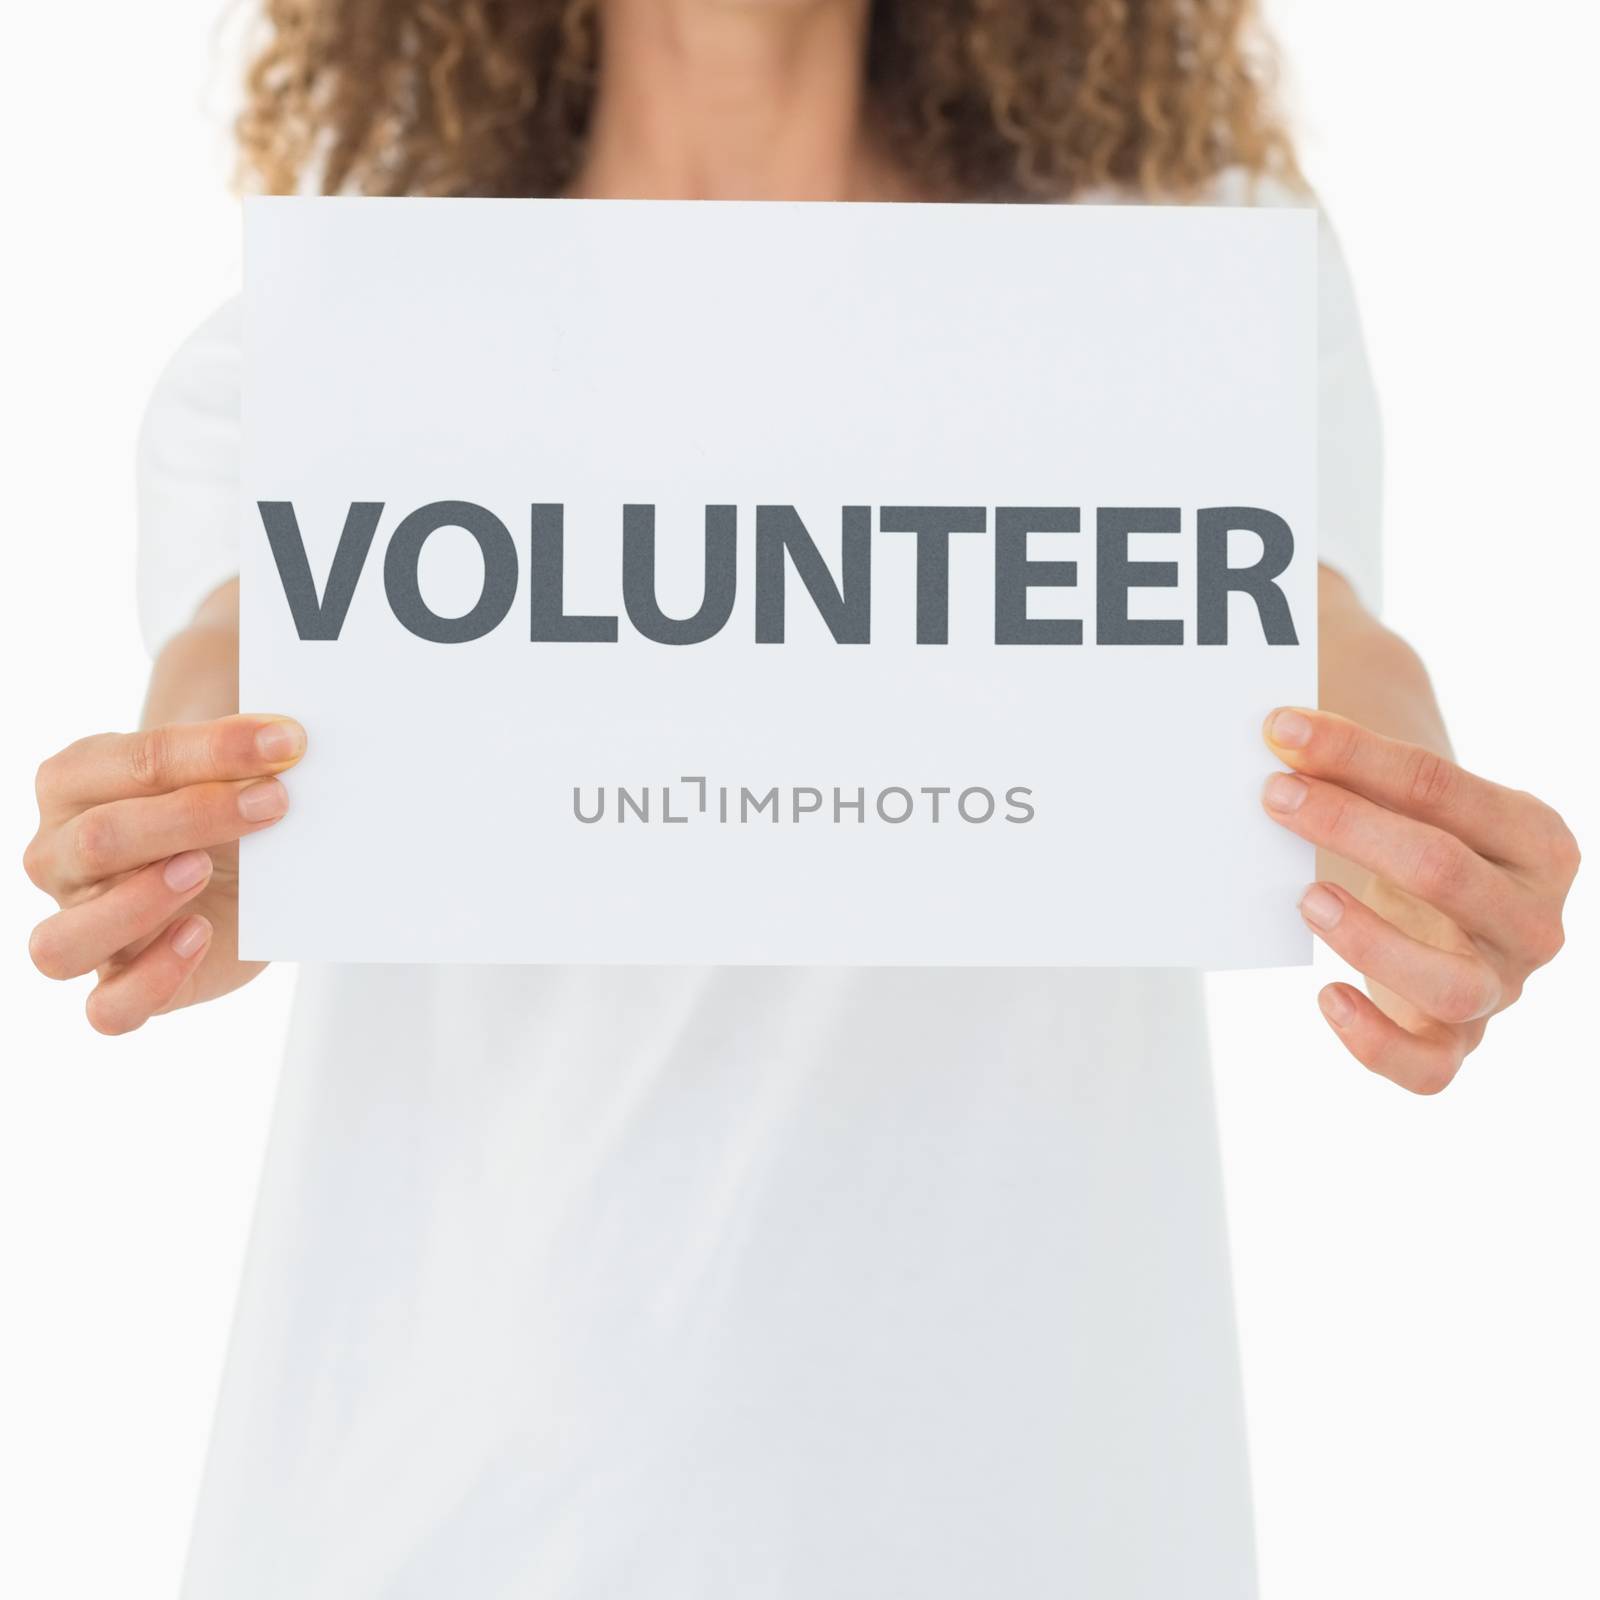 Volunteer showing a poster on white background